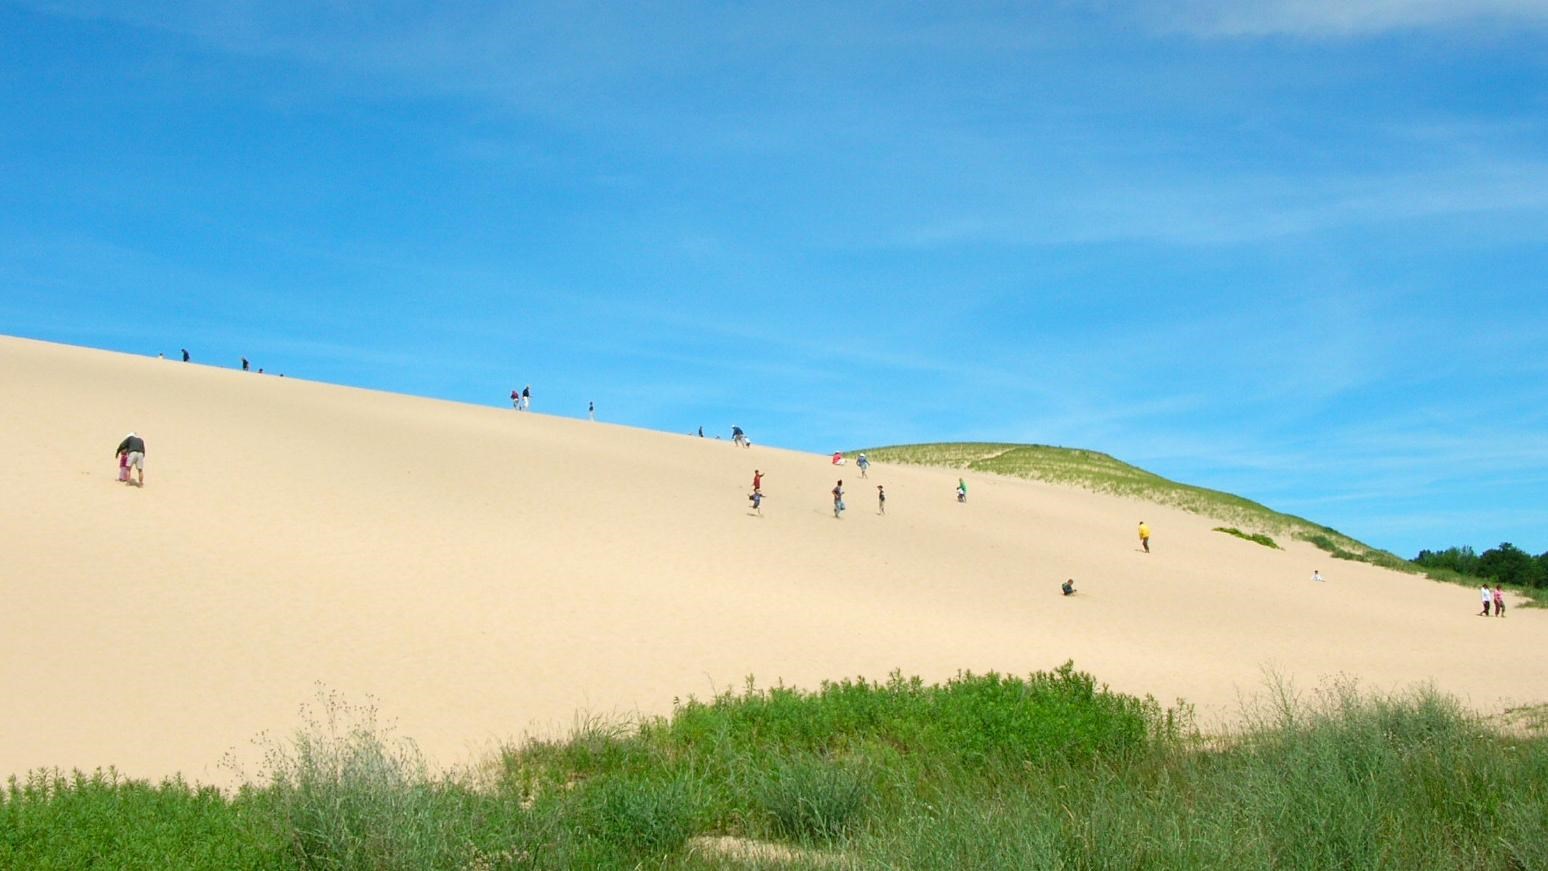 A large sand hill against a azure sky with green dune grass in the foreground